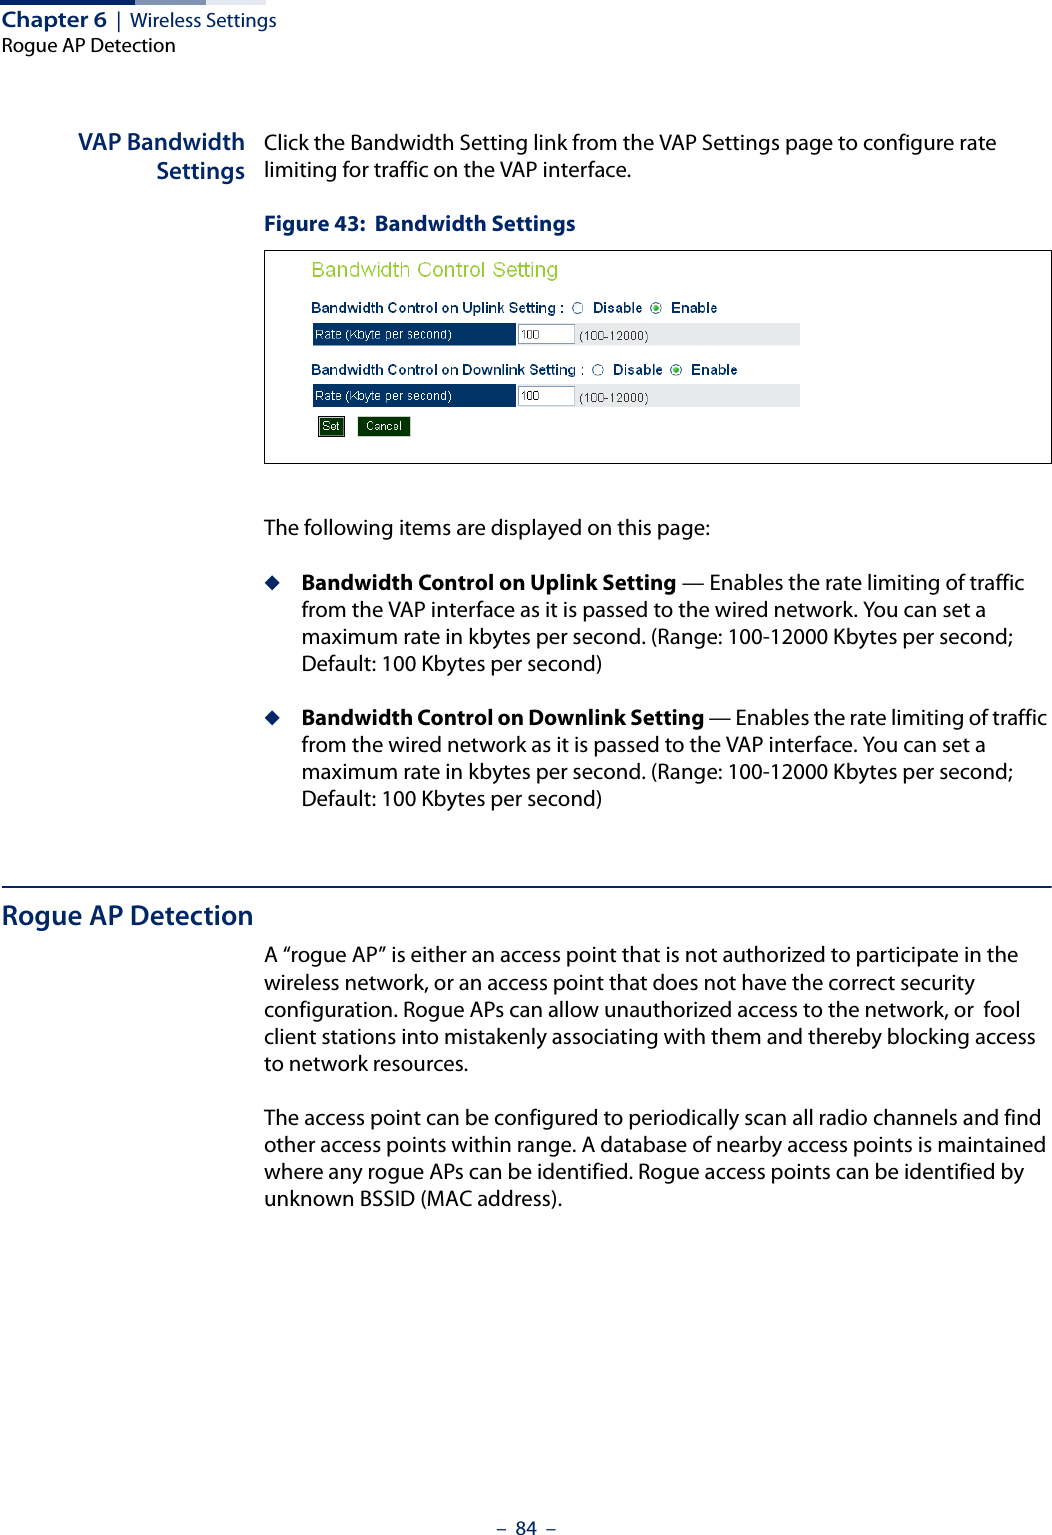 Chapter 6  |  Wireless SettingsRogue AP Detection–  84  –VAP BandwidthSettingsClick the Bandwidth Setting link from the VAP Settings page to configure rate limiting for traffic on the VAP interface.Figure 43:  Bandwidth SettingsThe following items are displayed on this page:◆Bandwidth Control on Uplink Setting — Enables the rate limiting of traffic from the VAP interface as it is passed to the wired network. You can set a maximum rate in kbytes per second. (Range: 100-12000 Kbytes per second; Default: 100 Kbytes per second)◆Bandwidth Control on Downlink Setting — Enables the rate limiting of traffic from the wired network as it is passed to the VAP interface. You can set a maximum rate in kbytes per second. (Range: 100-12000 Kbytes per second; Default: 100 Kbytes per second)Rogue AP DetectionA “rogue AP” is either an access point that is not authorized to participate in the wireless network, or an access point that does not have the correct security configuration. Rogue APs can allow unauthorized access to the network, or  fool client stations into mistakenly associating with them and thereby blocking access to network resources. The access point can be configured to periodically scan all radio channels and find other access points within range. A database of nearby access points is maintained where any rogue APs can be identified. Rogue access points can be identified by unknown BSSID (MAC address).